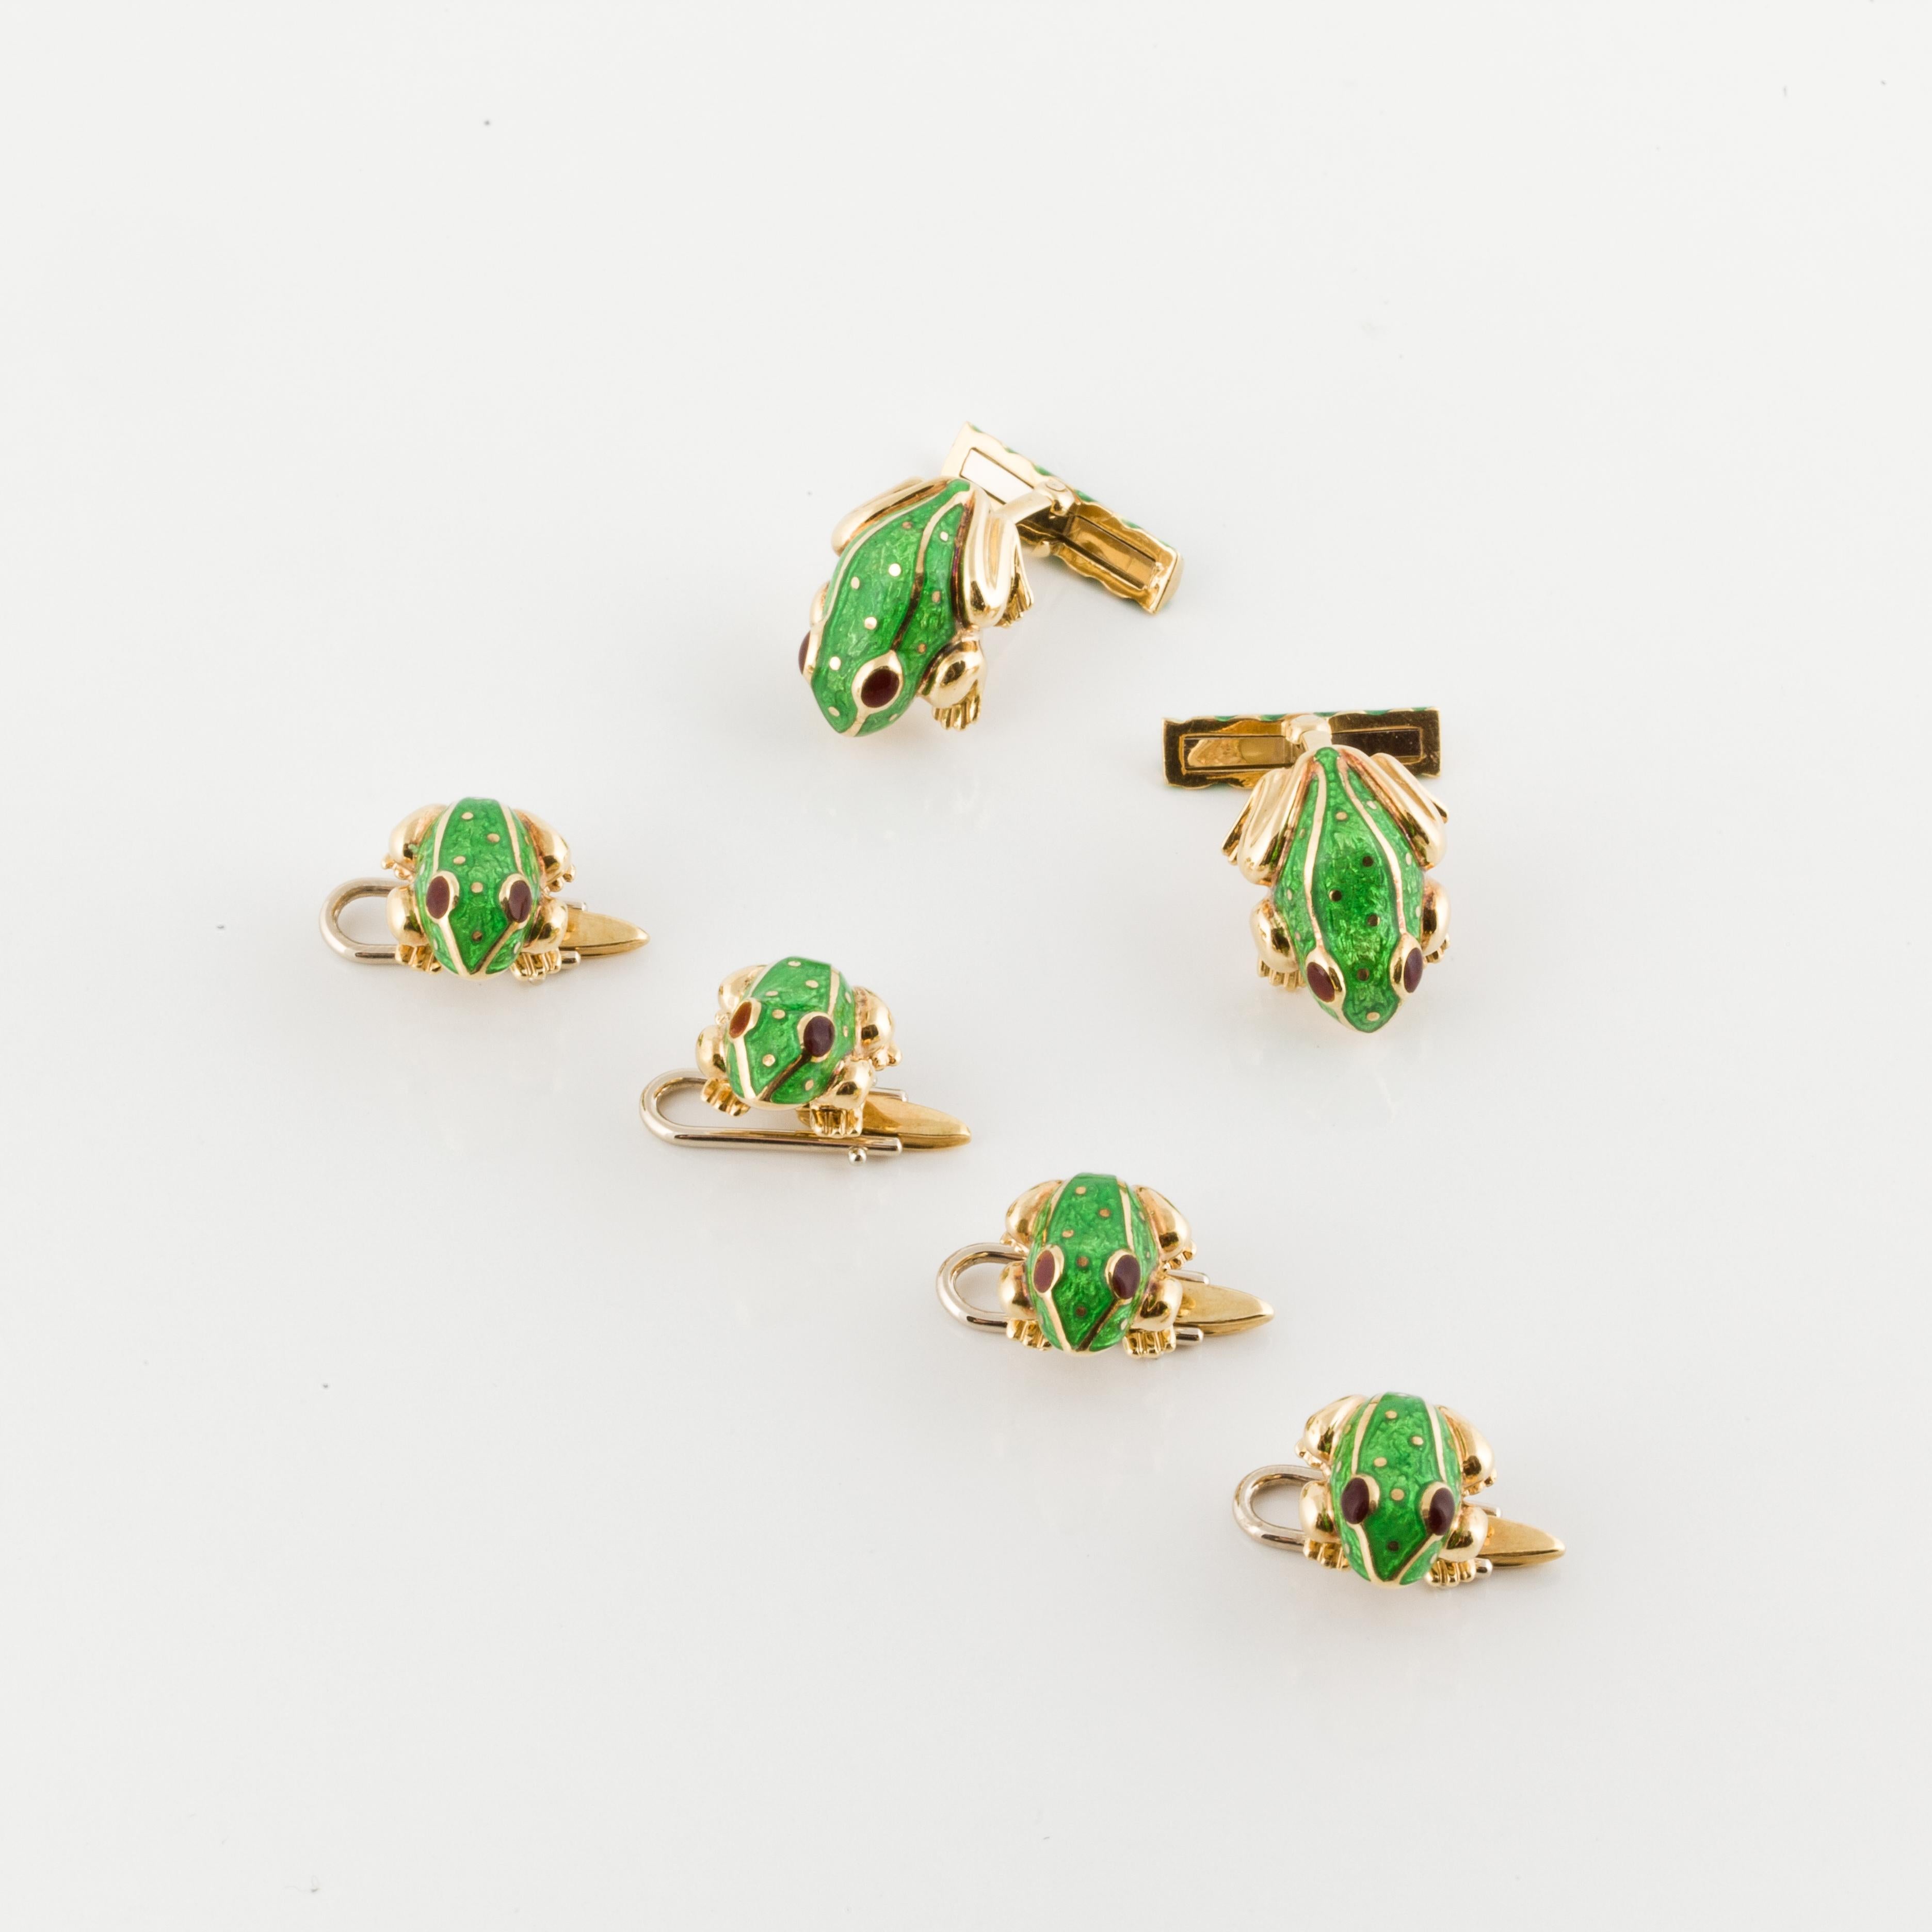 David Webb 18K yellow gold frog dress set composed of cufflinks and 4 studs. The frogs are enameled green.  The cuff links measure 3/4 inches long and the four studs measure 5/8 inches each.  